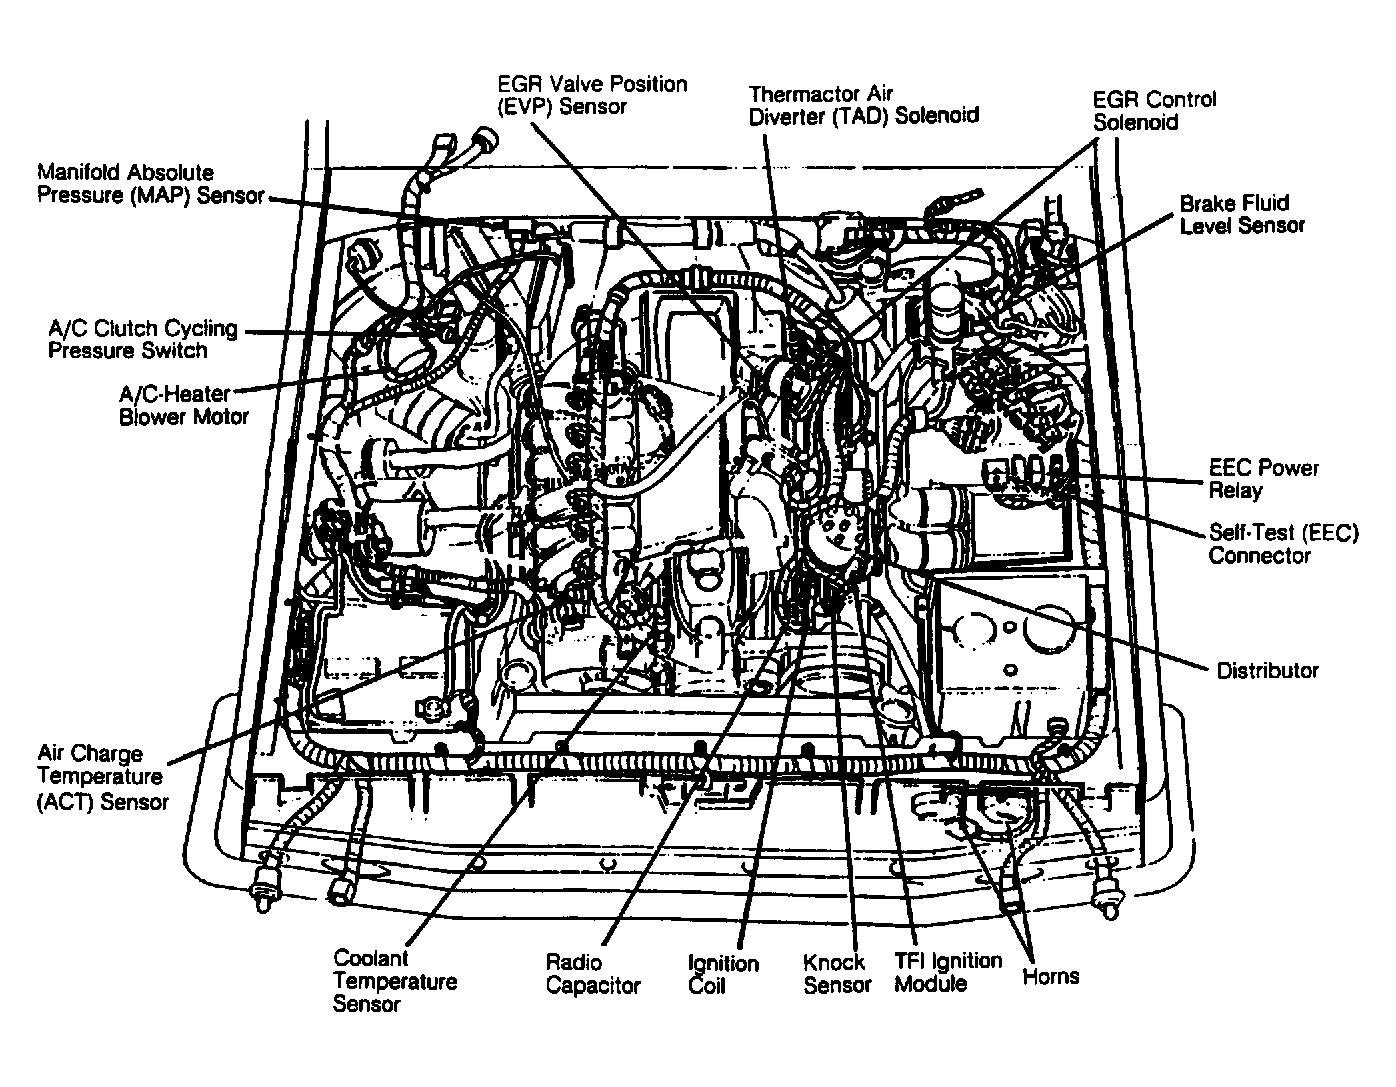 91 ford F150 5.0 Engine Wiring Diagram My Bronco Wount Start Ok I Got A 91 ford Bronco 5 8l V8 Page 2 Of 91 ford F150 5.0 Engine Wiring Diagram